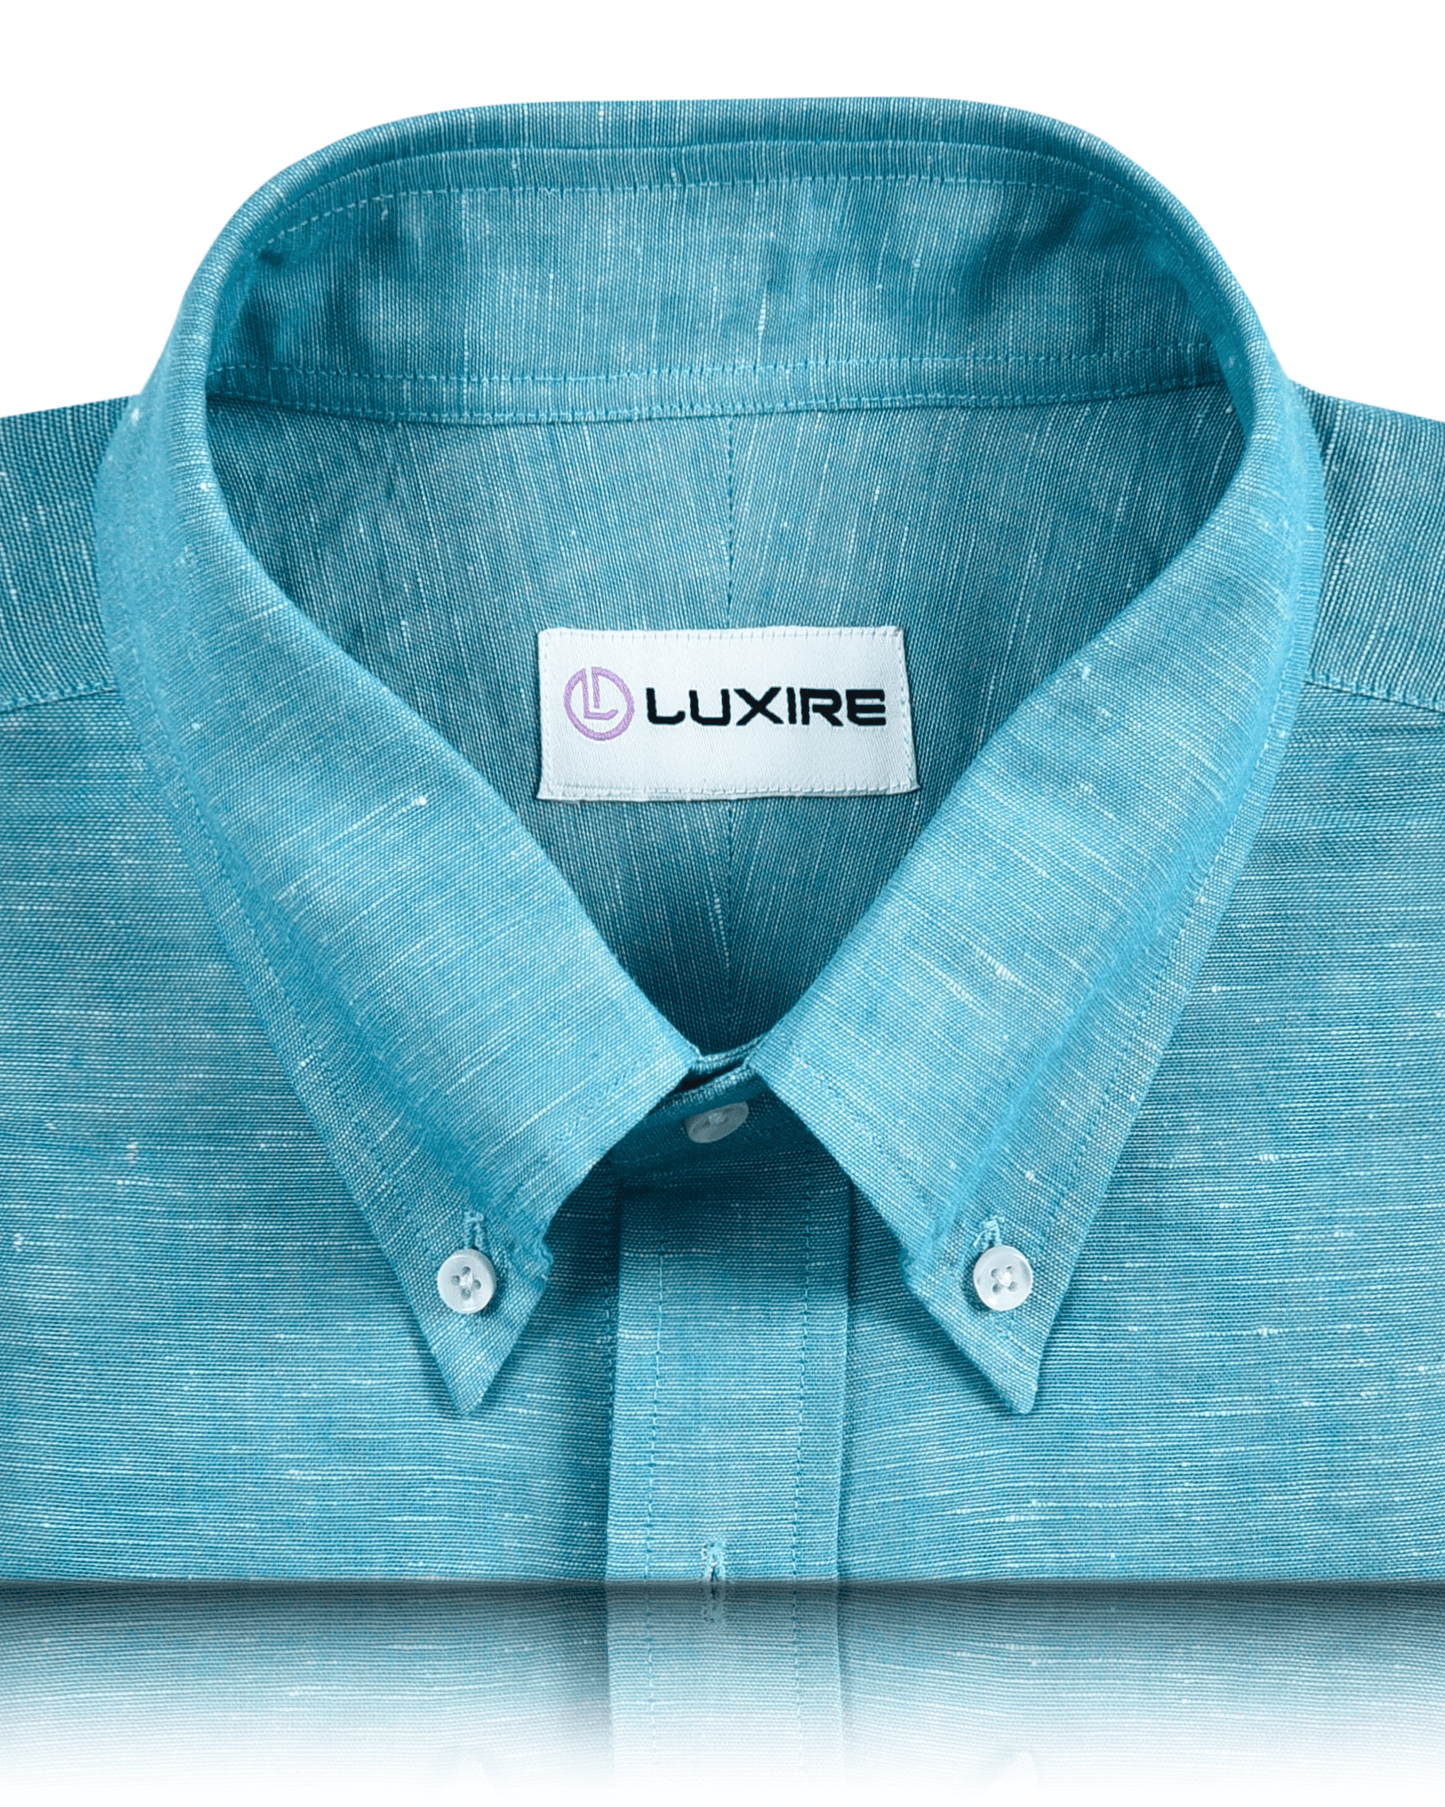 Collar of the custom linen shirt for men in turquiose blue chambray by Luxire Clothing